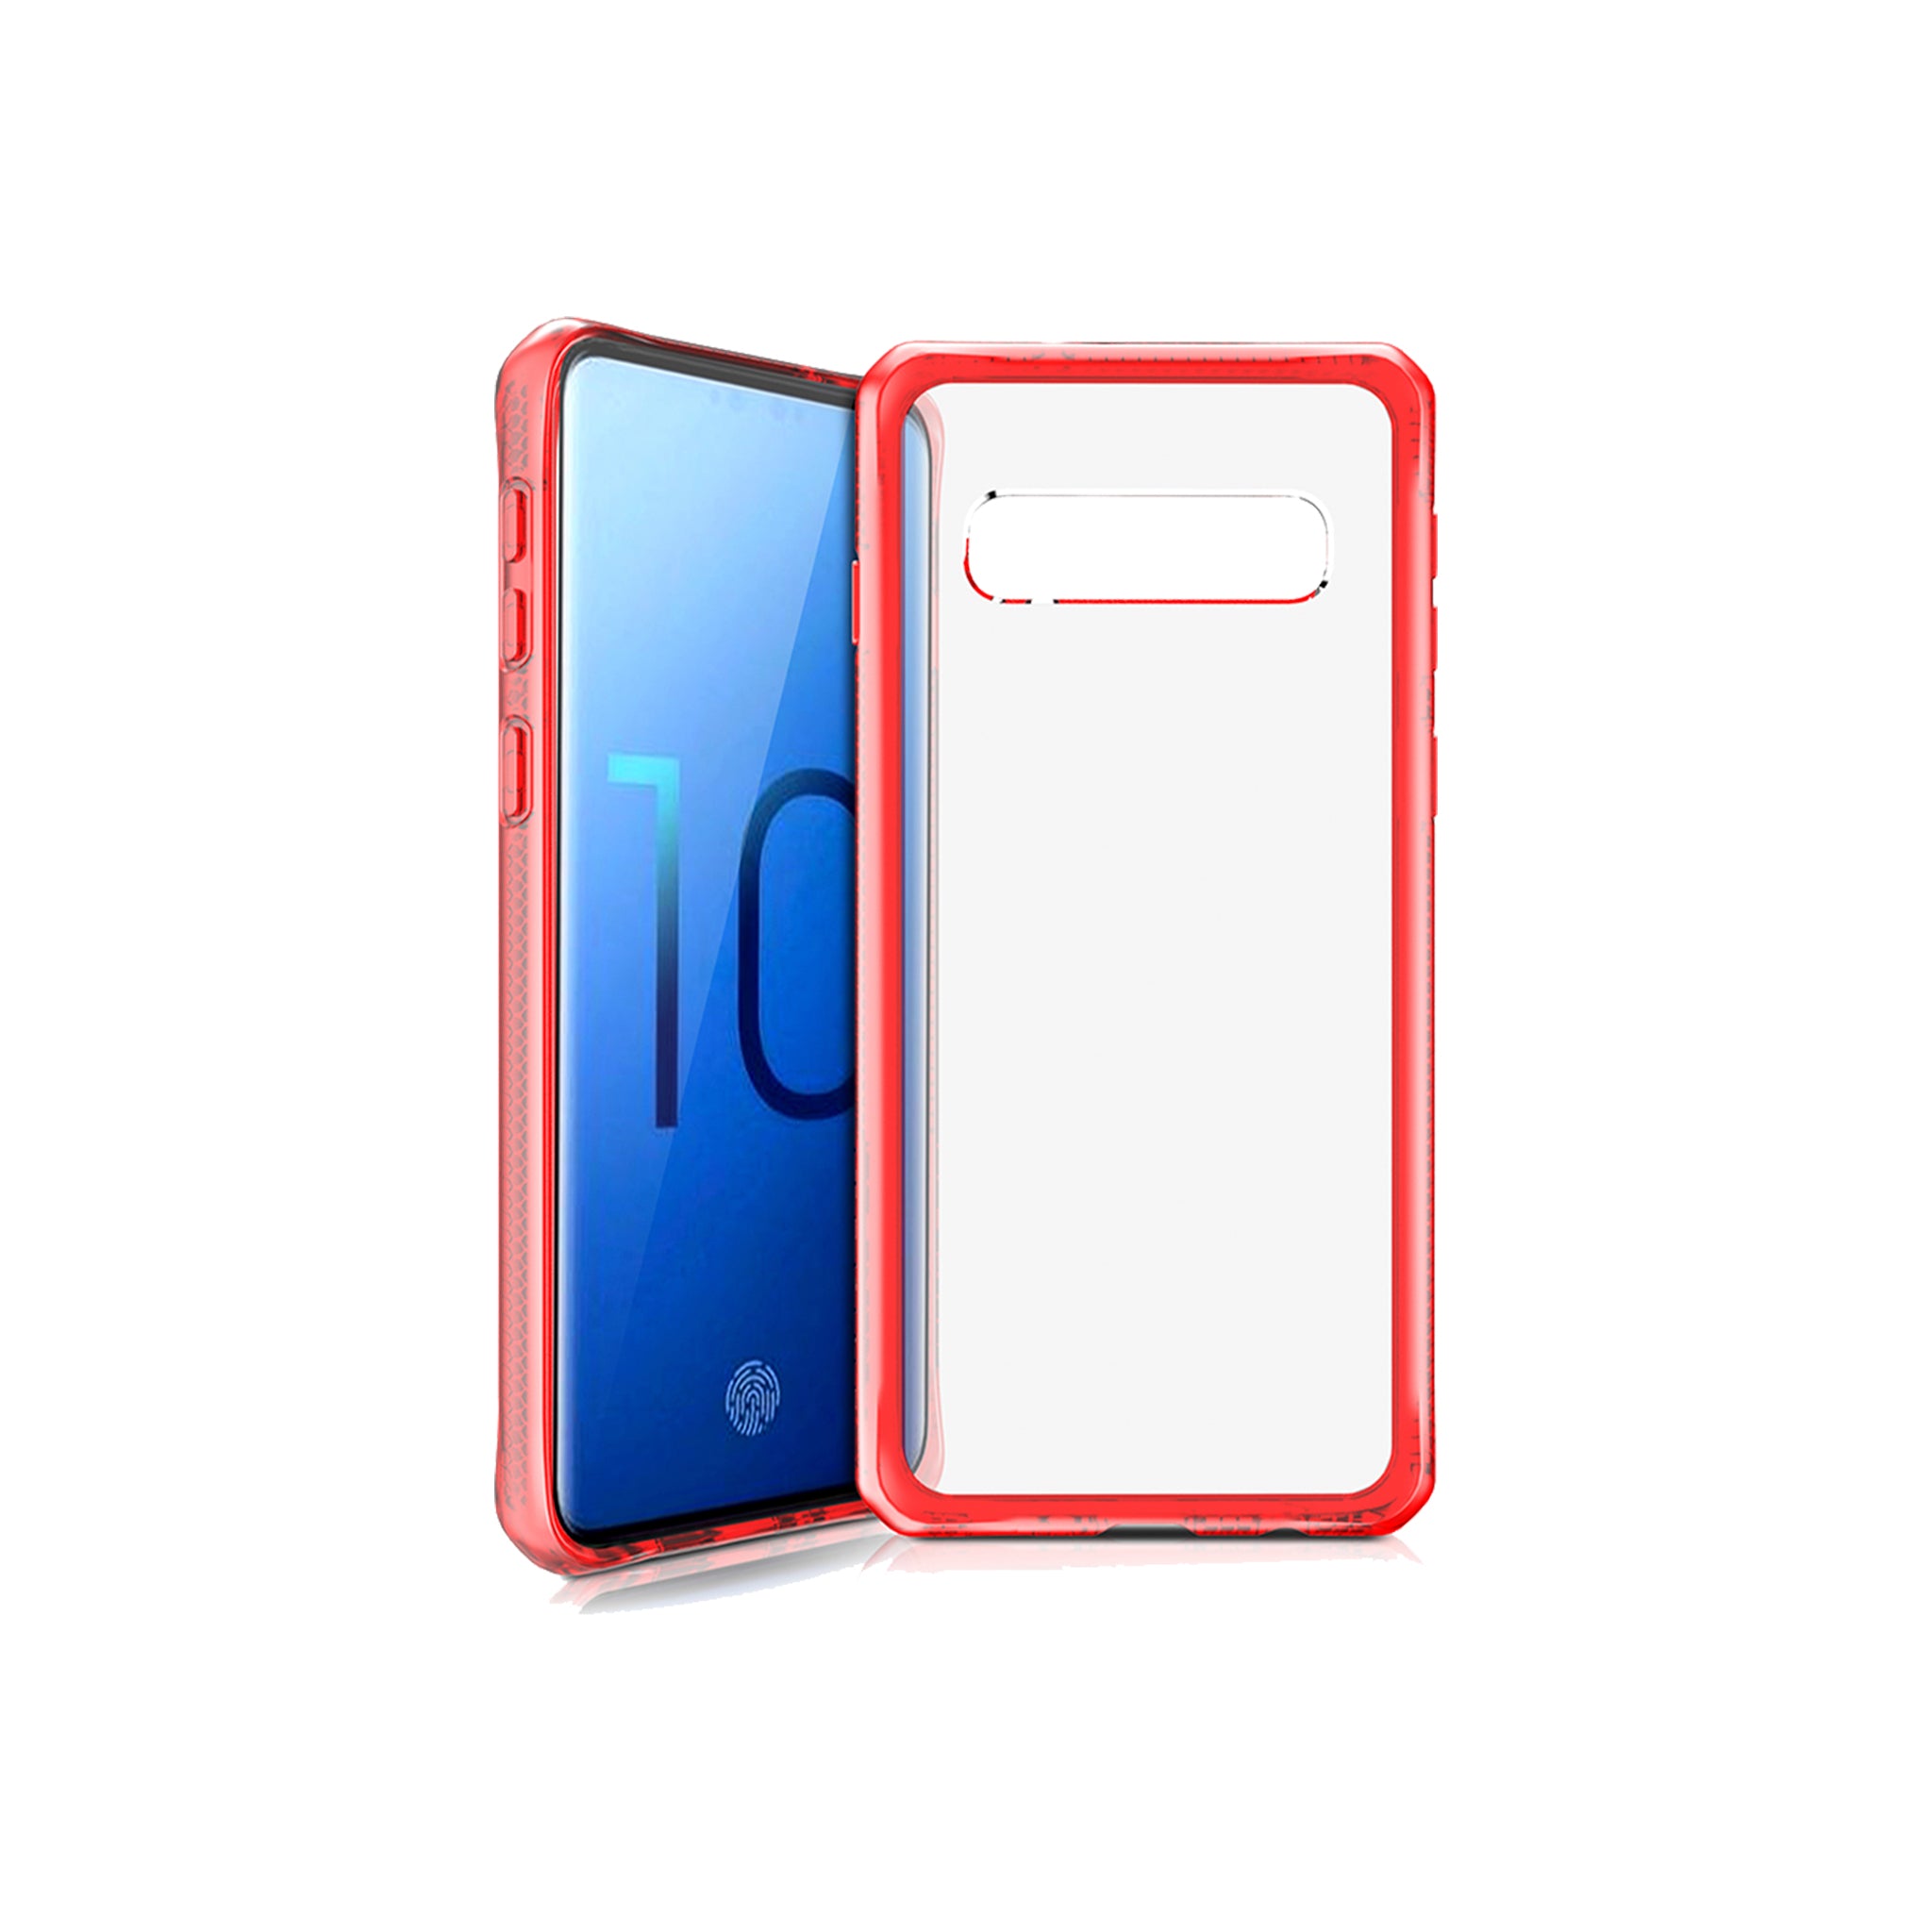 Itskins - Hybrid Frost Mkii Case For Samsung Galaxy S10 - Red And Transparent